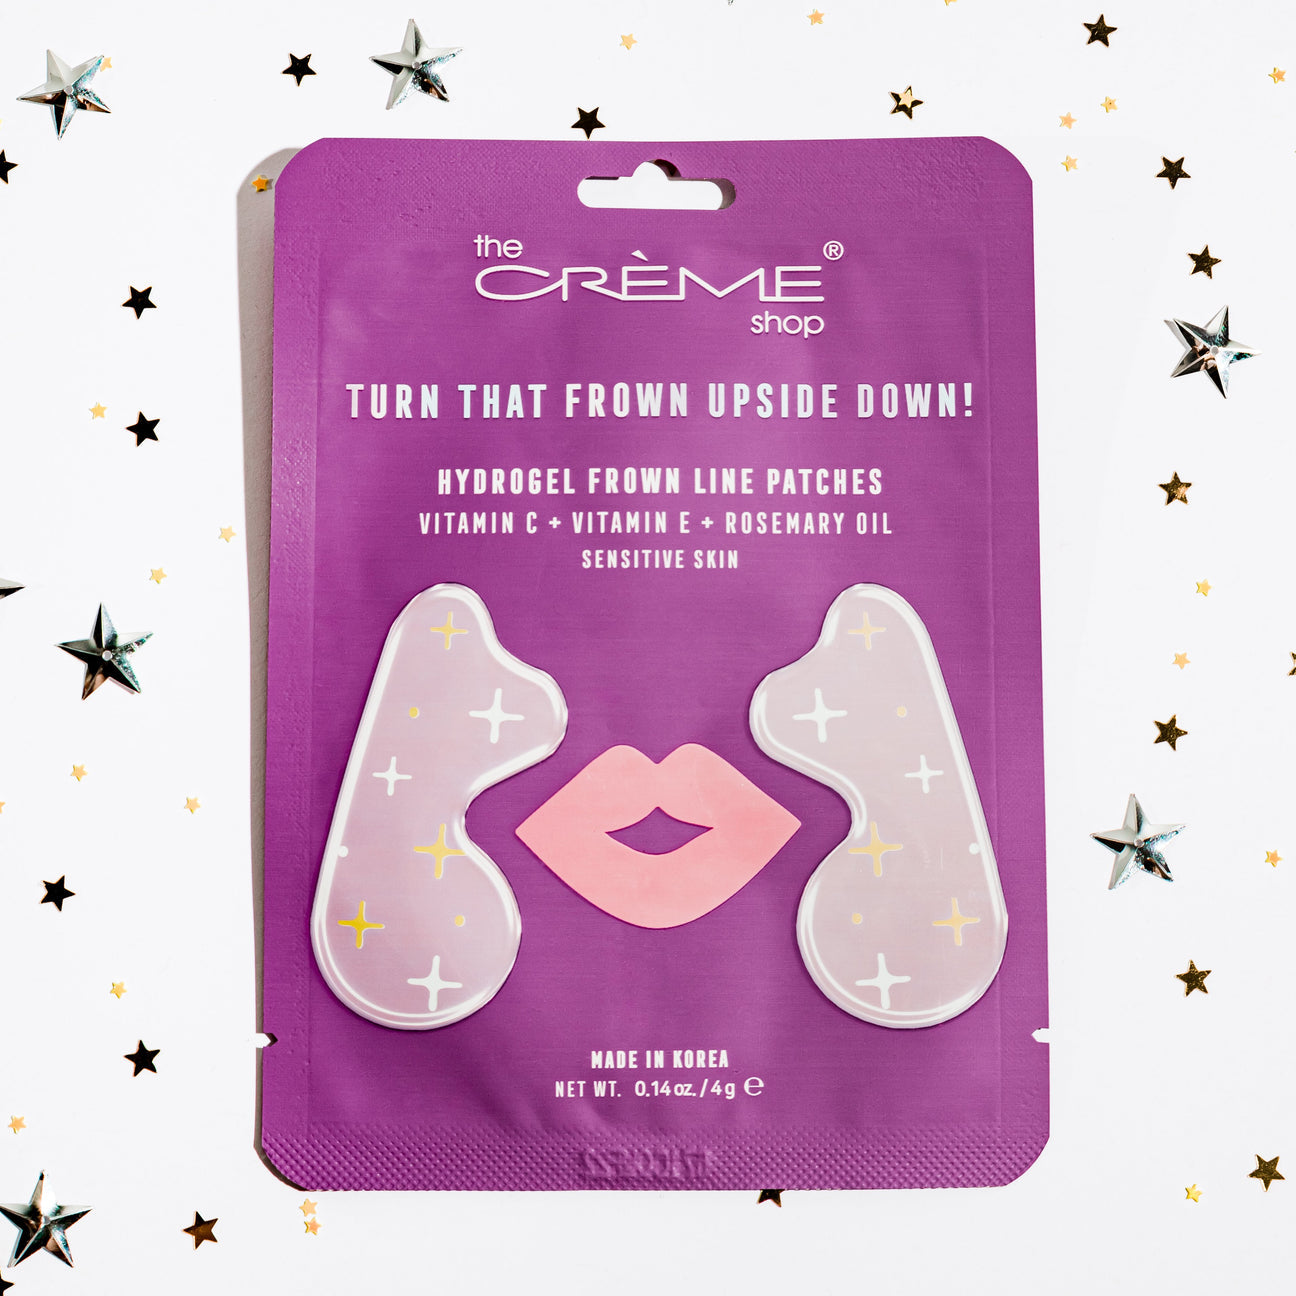 Turn That Frown Upside Down! - Hydrogel Frown Line Patches for Sensitive Skin